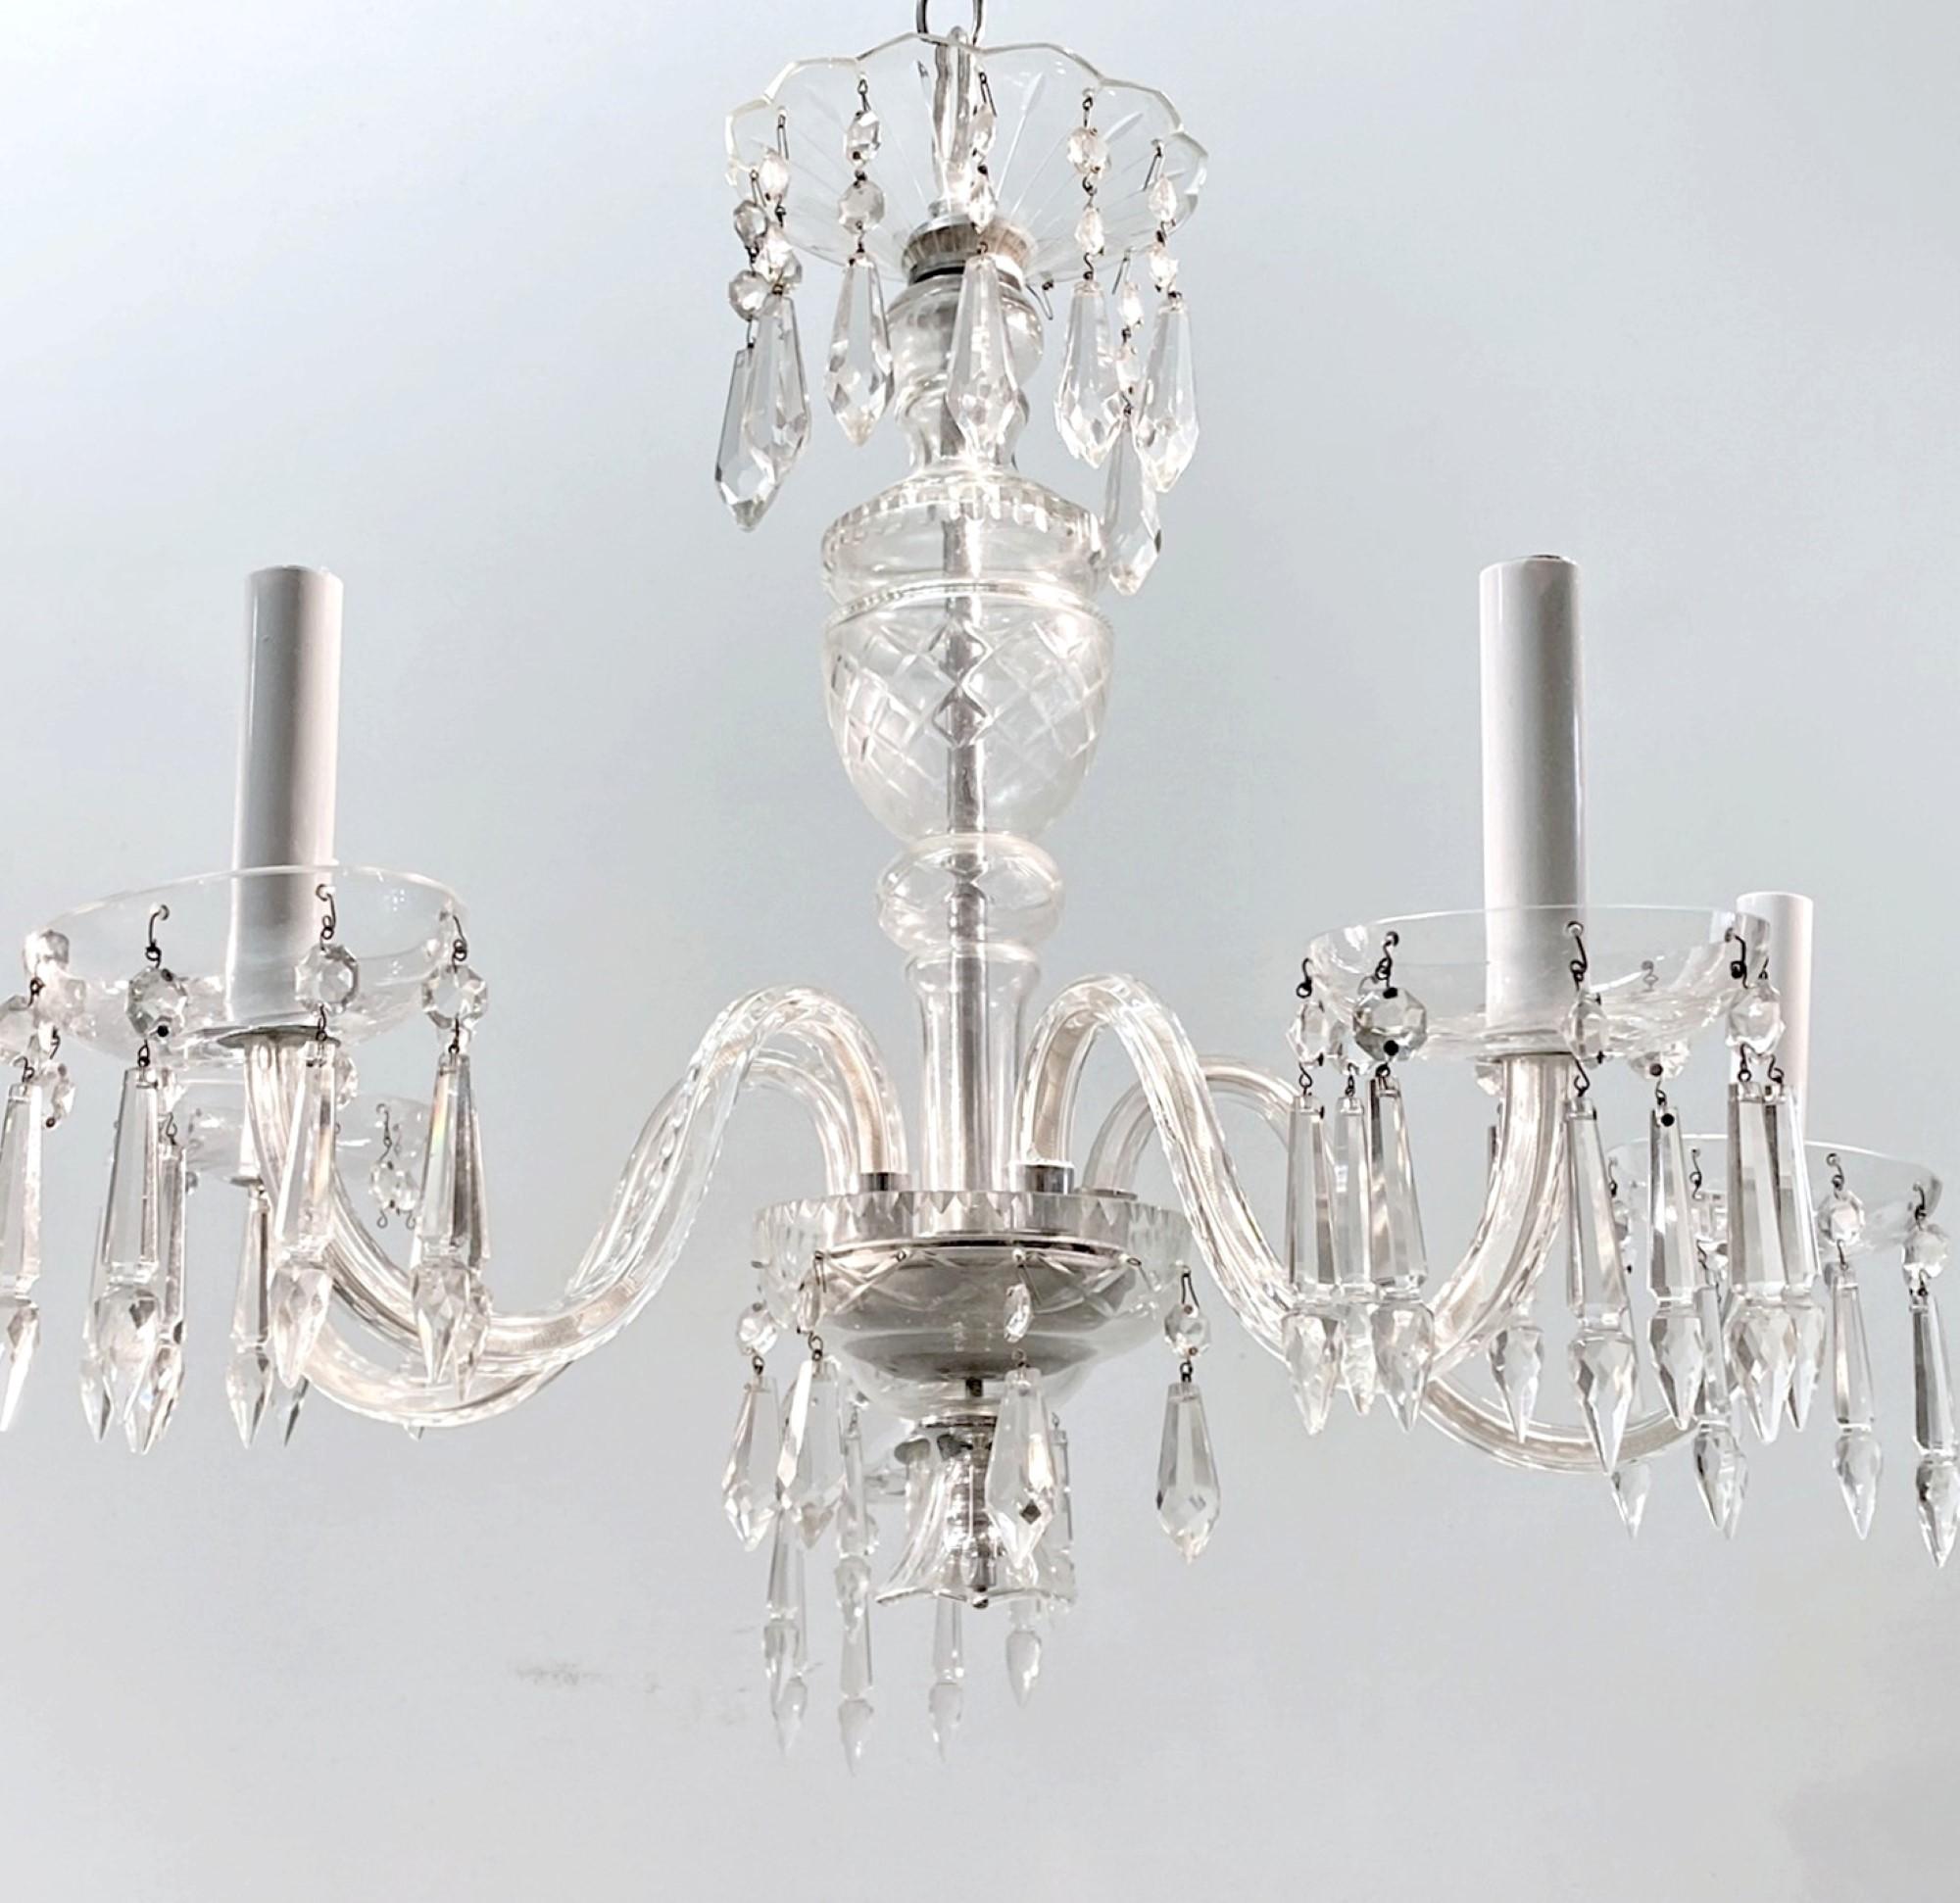 1920s five-arm clear crystal chandelier featuring sags of crystal. This can be seen at our 400 Gilligan St location in Scranton, PA.